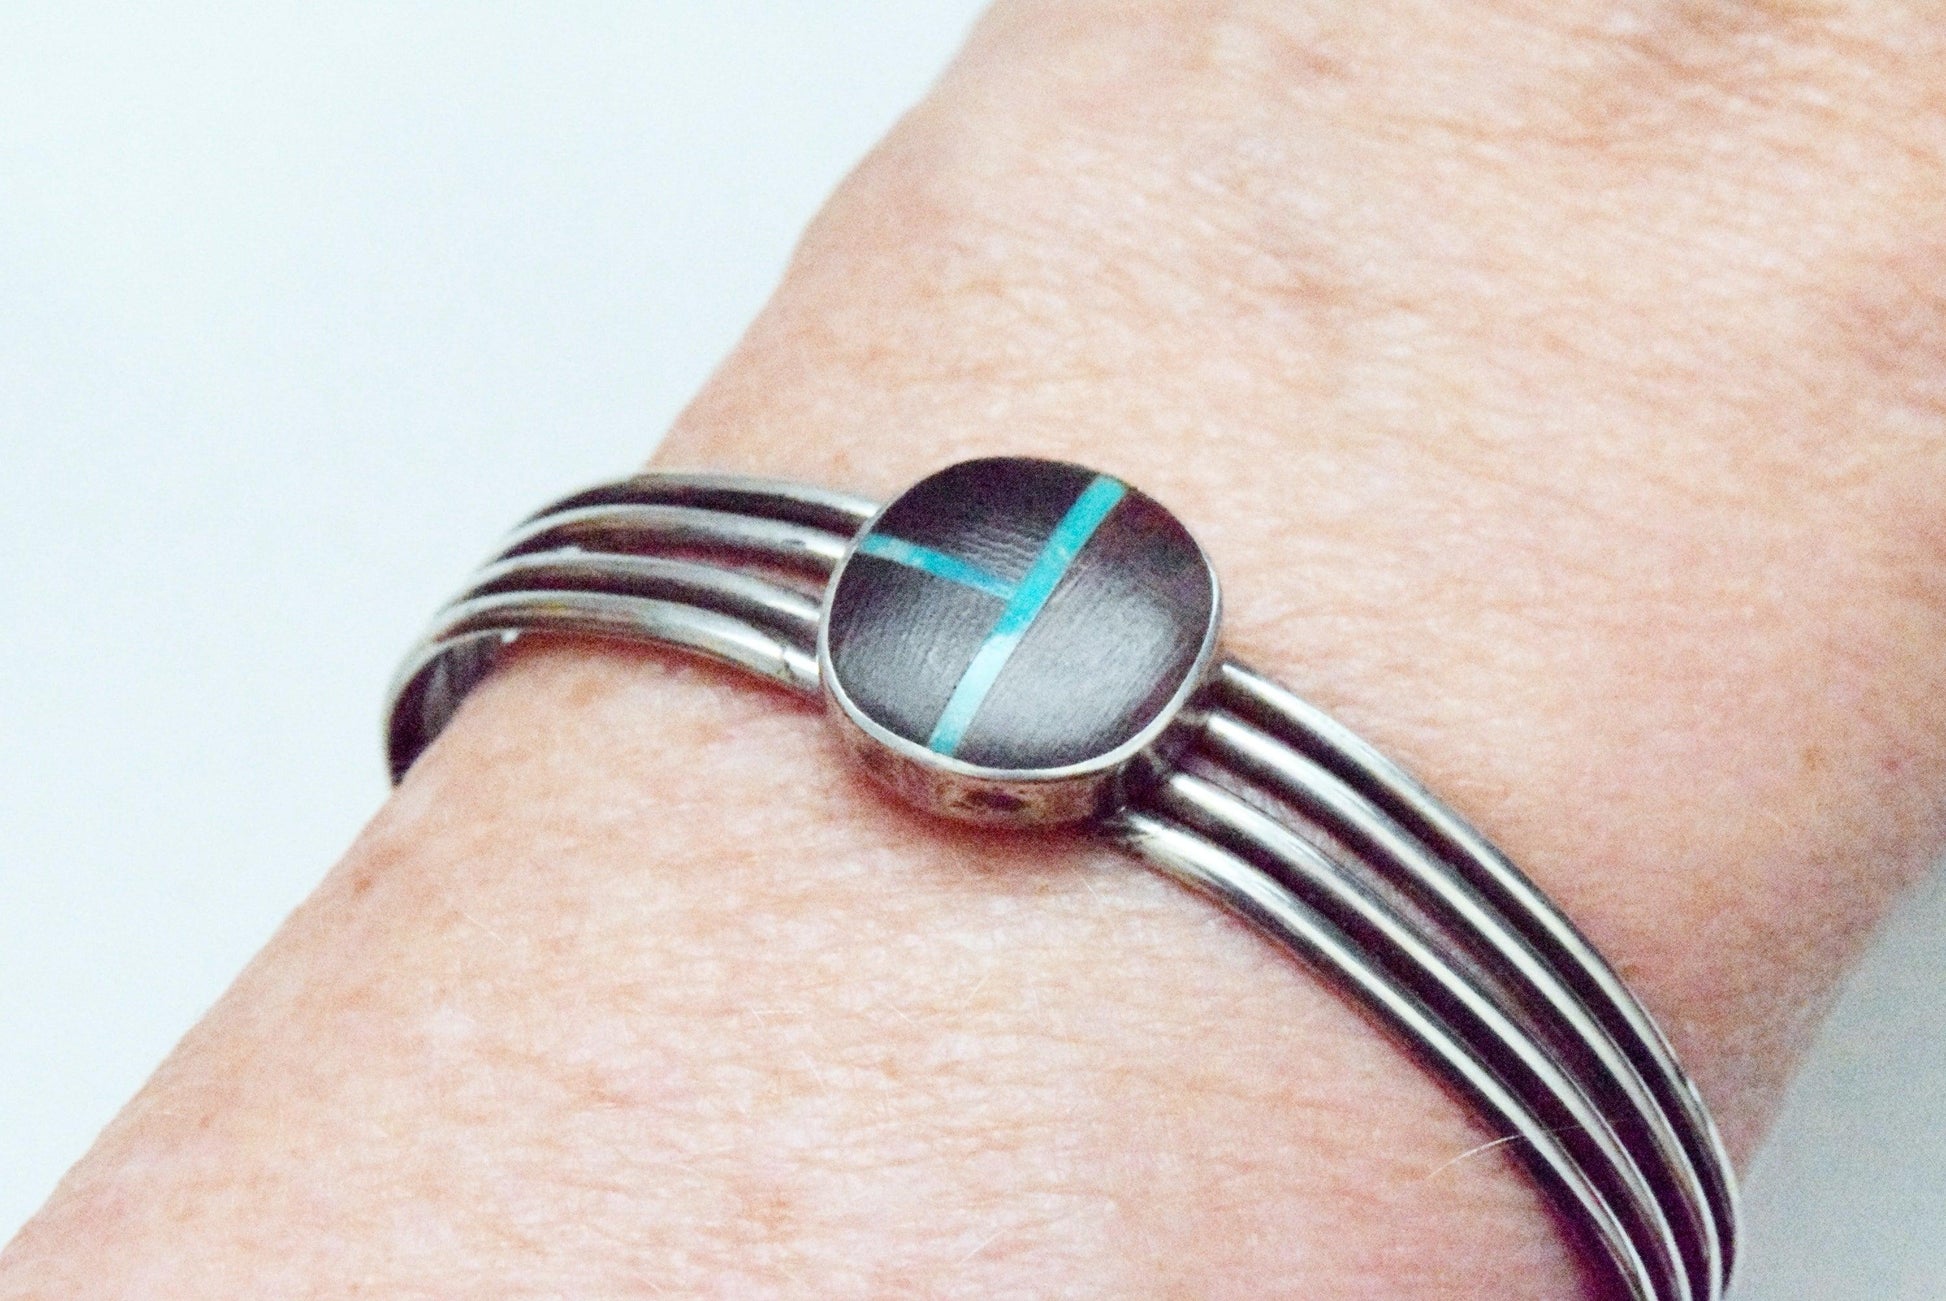 Vintage Native American Bracelet and Ring Set with Ironwood and Turquoise Inlay - Anteeka